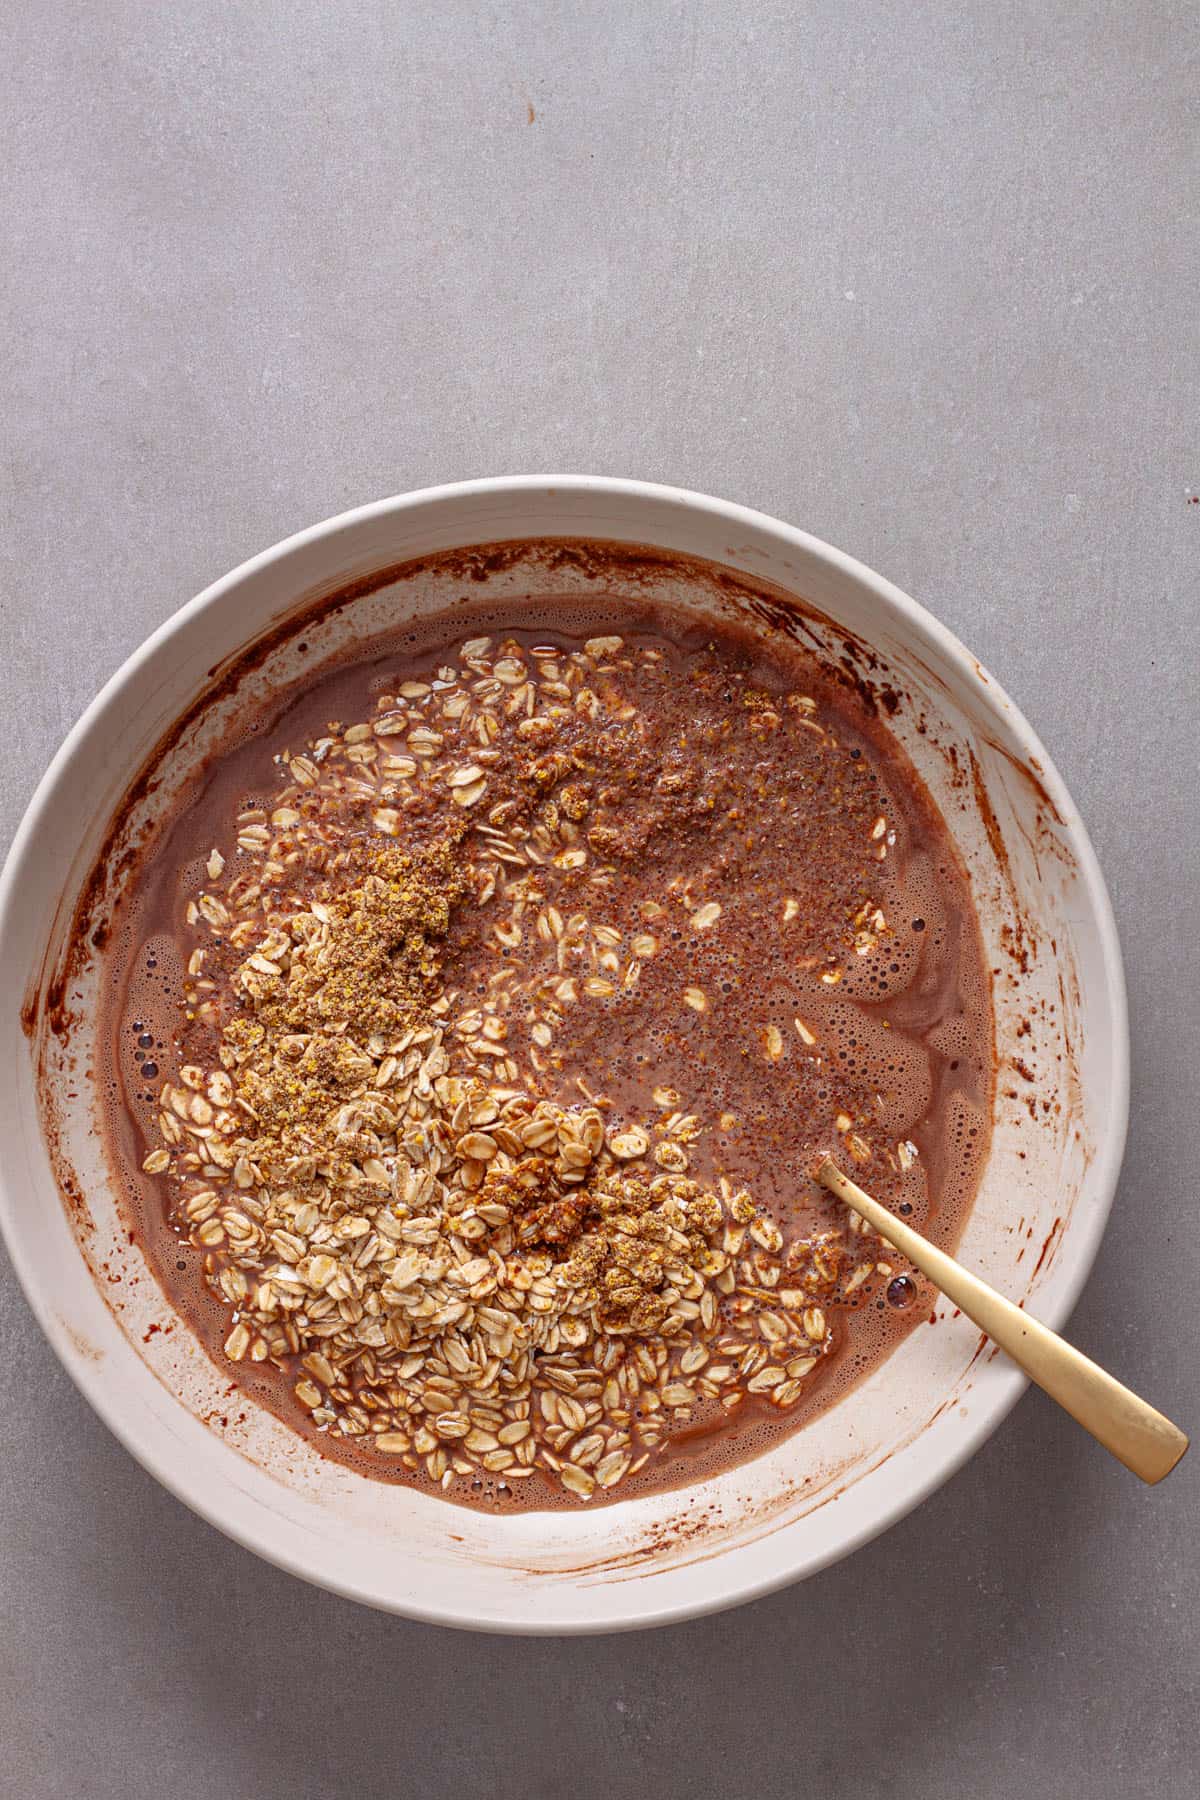 Milk and nutella in a mixing bowl with rolled oats and flaxseeds getting stirred in.